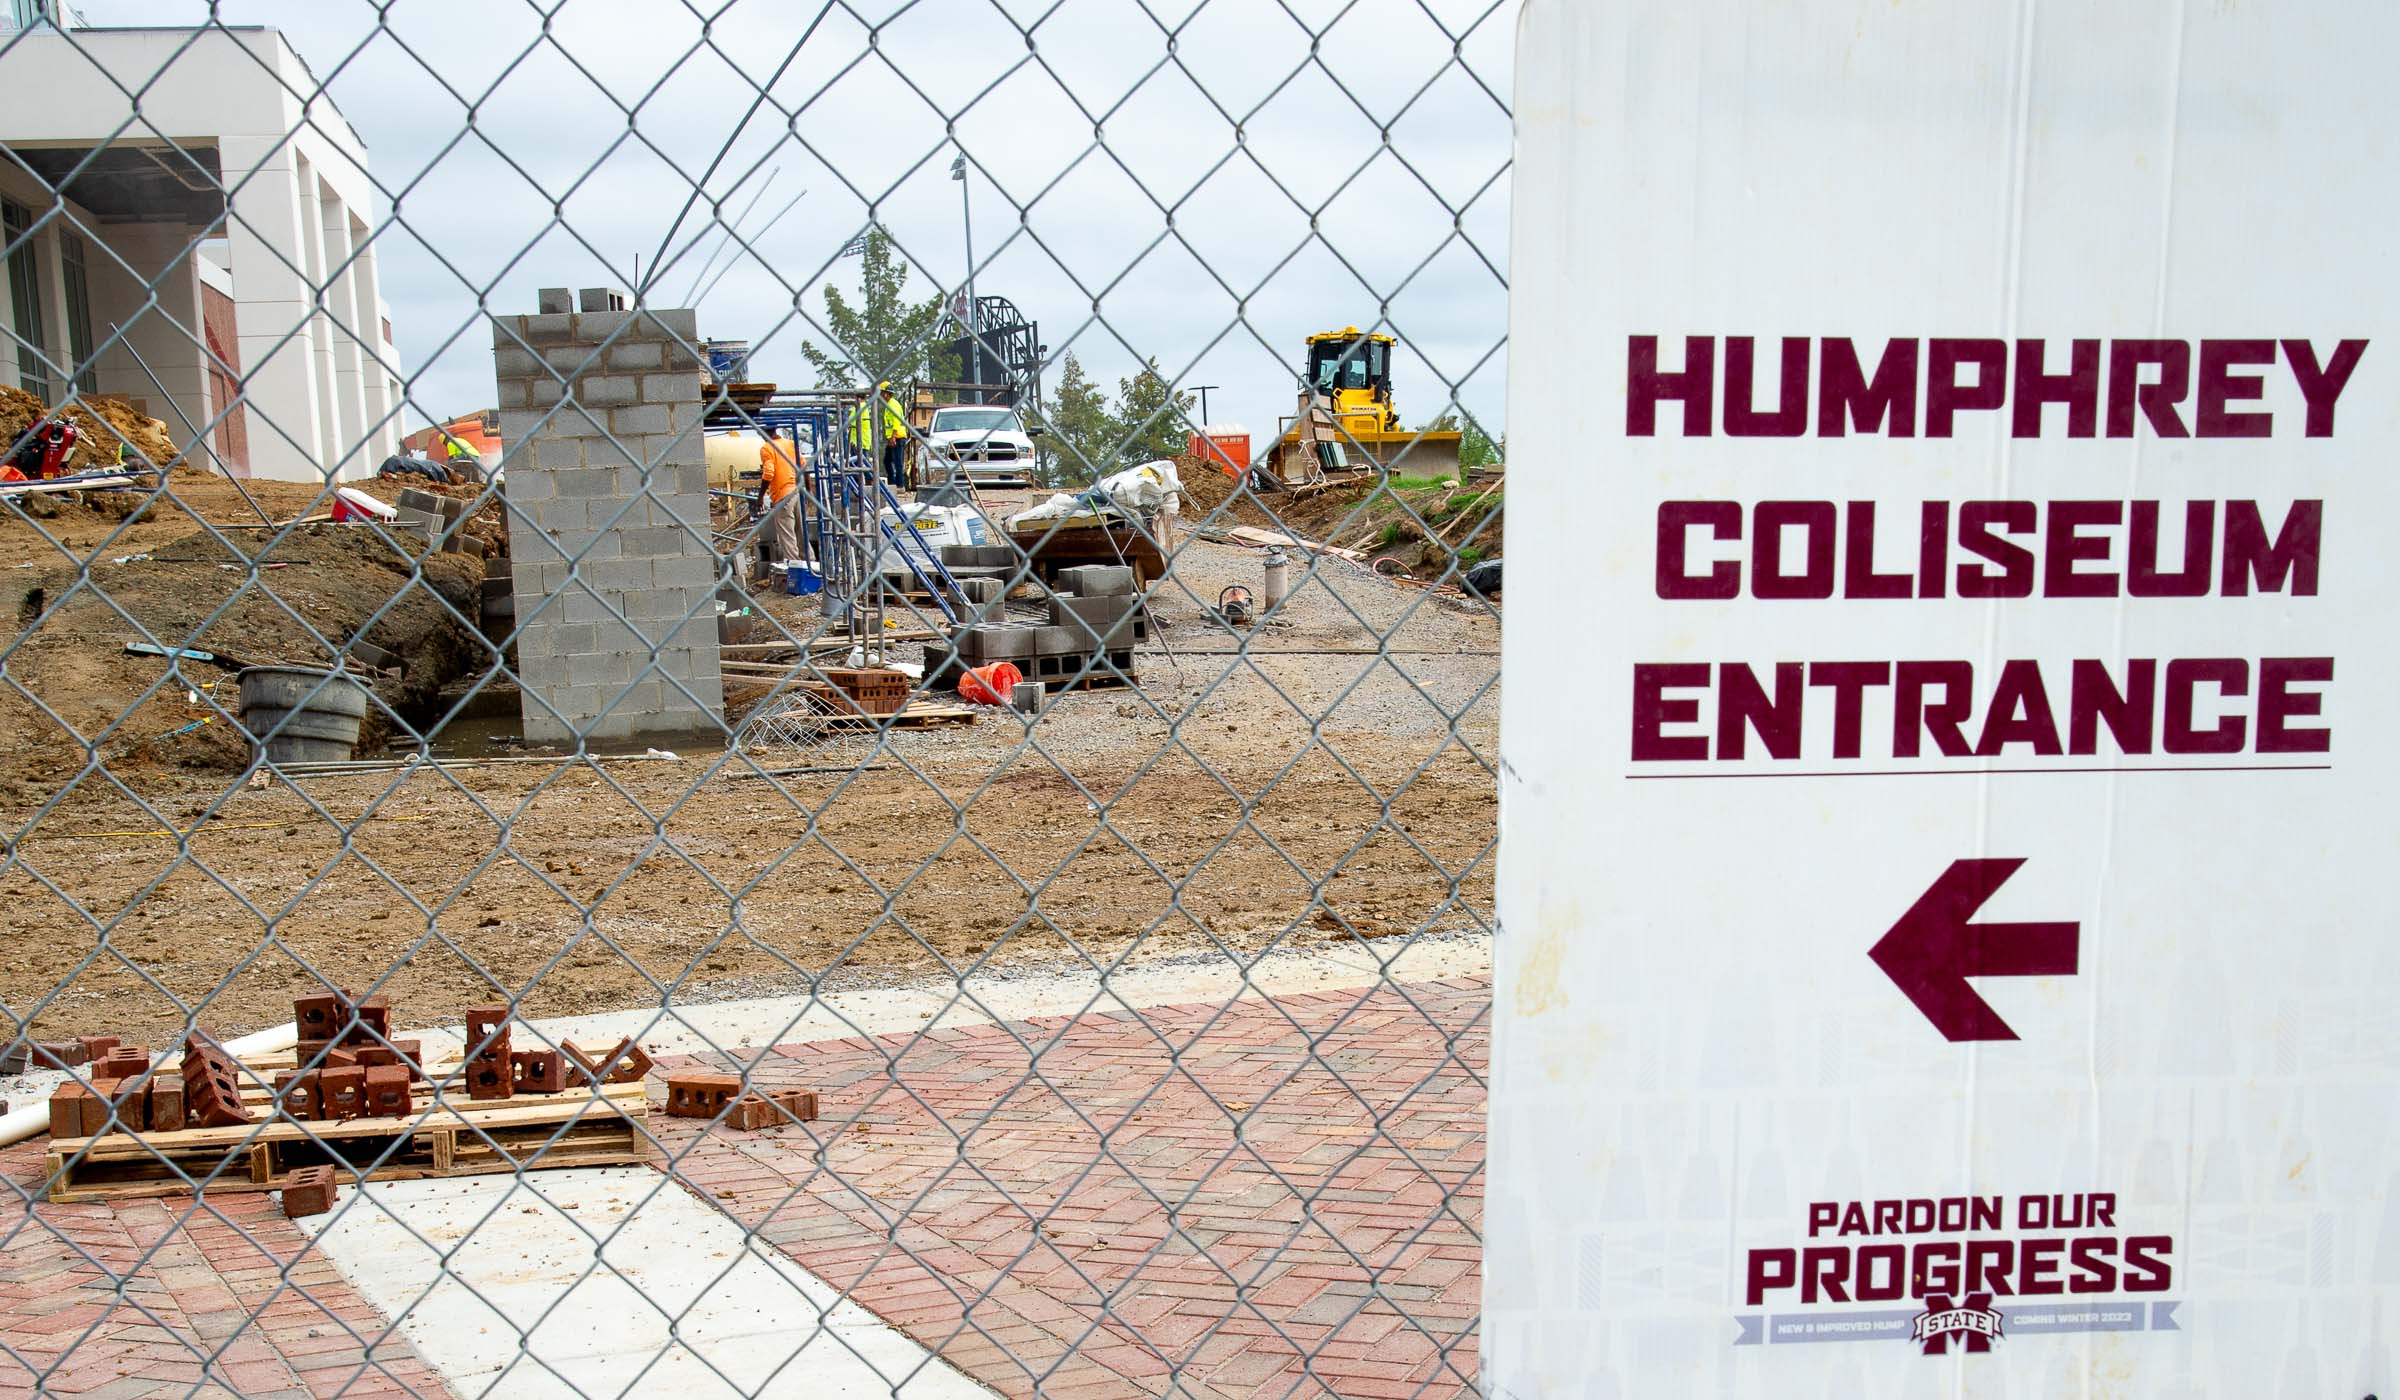 &quot;Pardon Our Progress&quot; sign on fench with construction in the background, with arrow pointing the way to the Humphrey Coliseum Entrance.